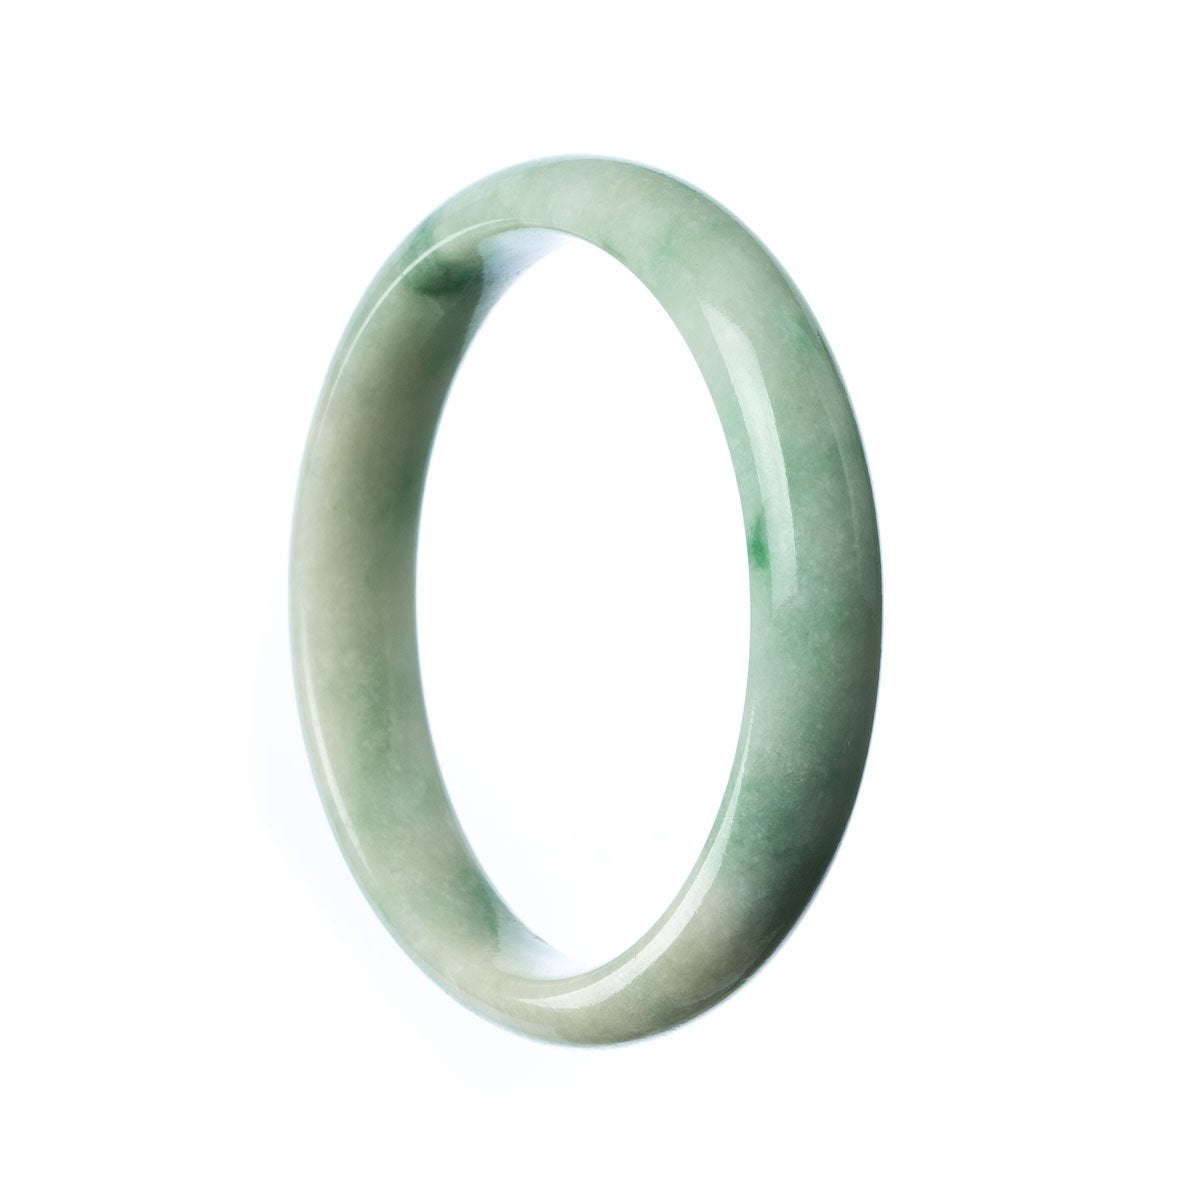 A beautiful pale green jade bracelet in a half moon shape, made from genuine Grade A jade. Perfect for adding a touch of traditional elegance to any outfit.